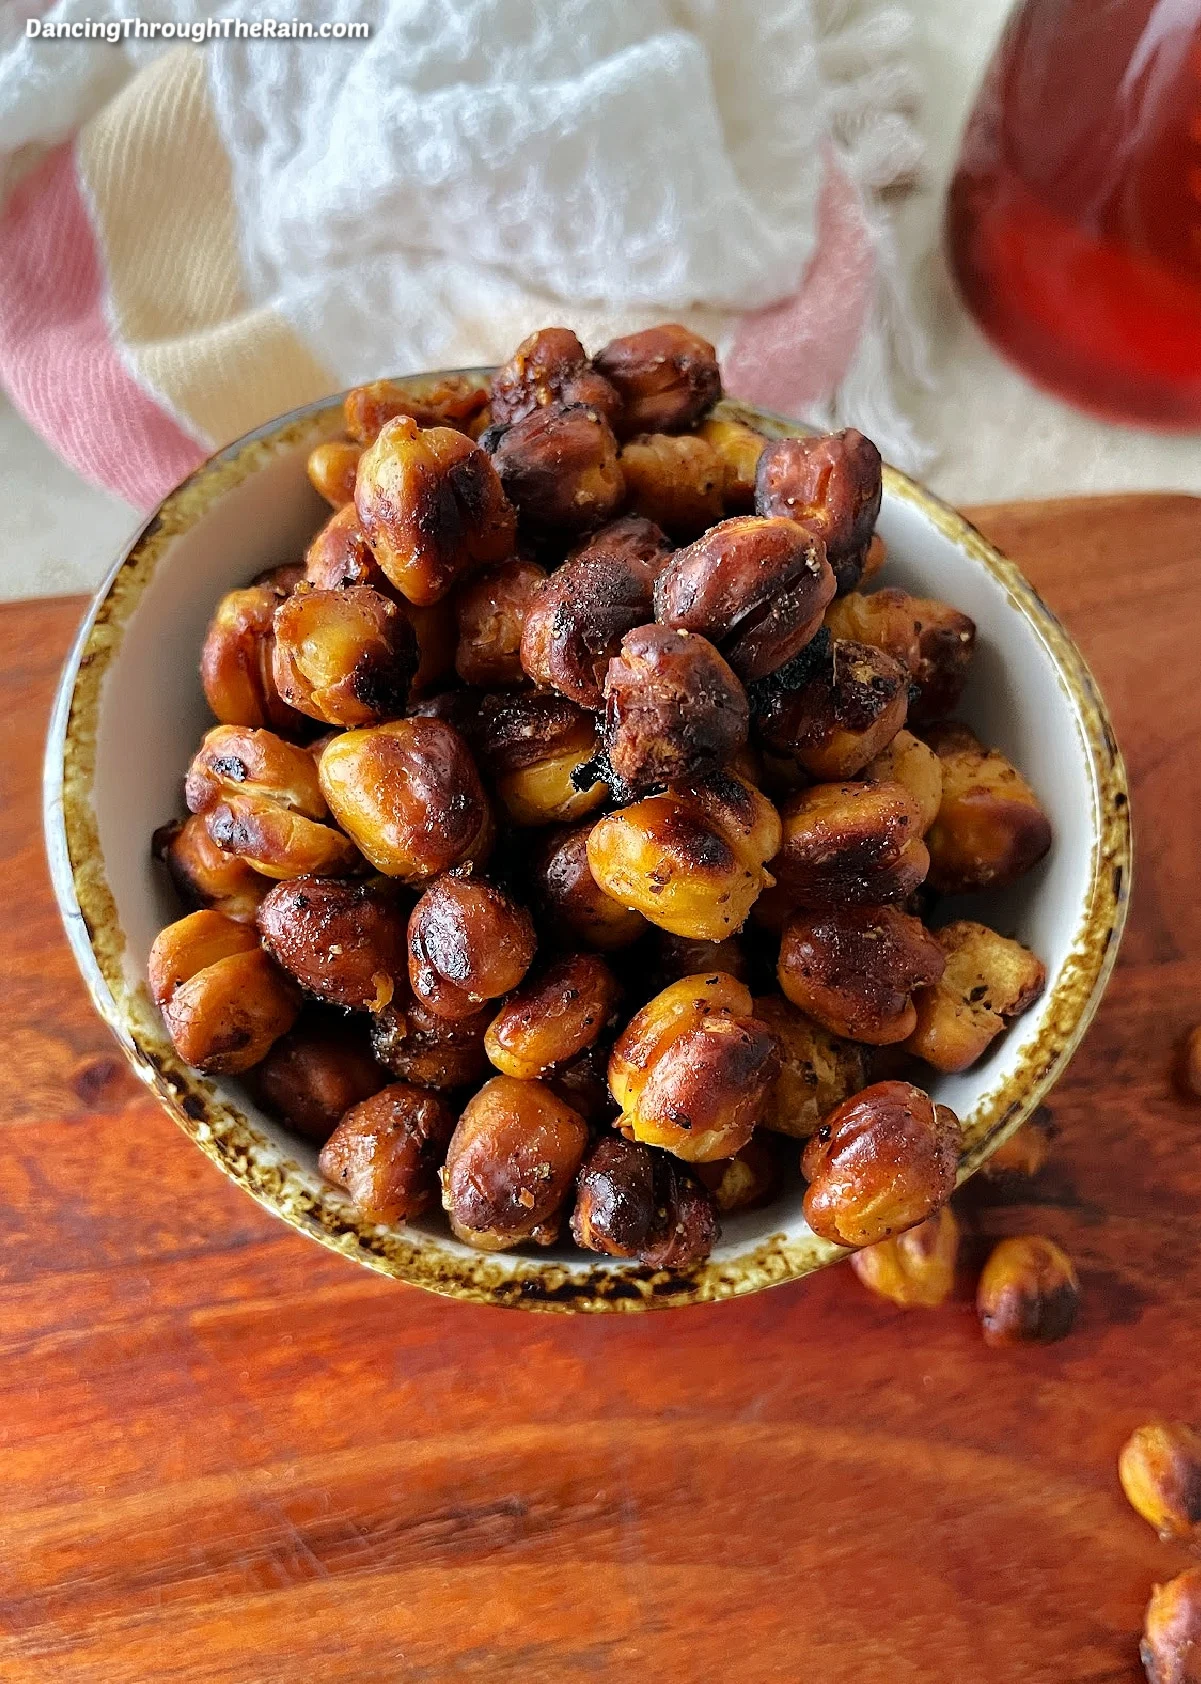 Honey Roasted Chickpeas from Dancing Through the Rain